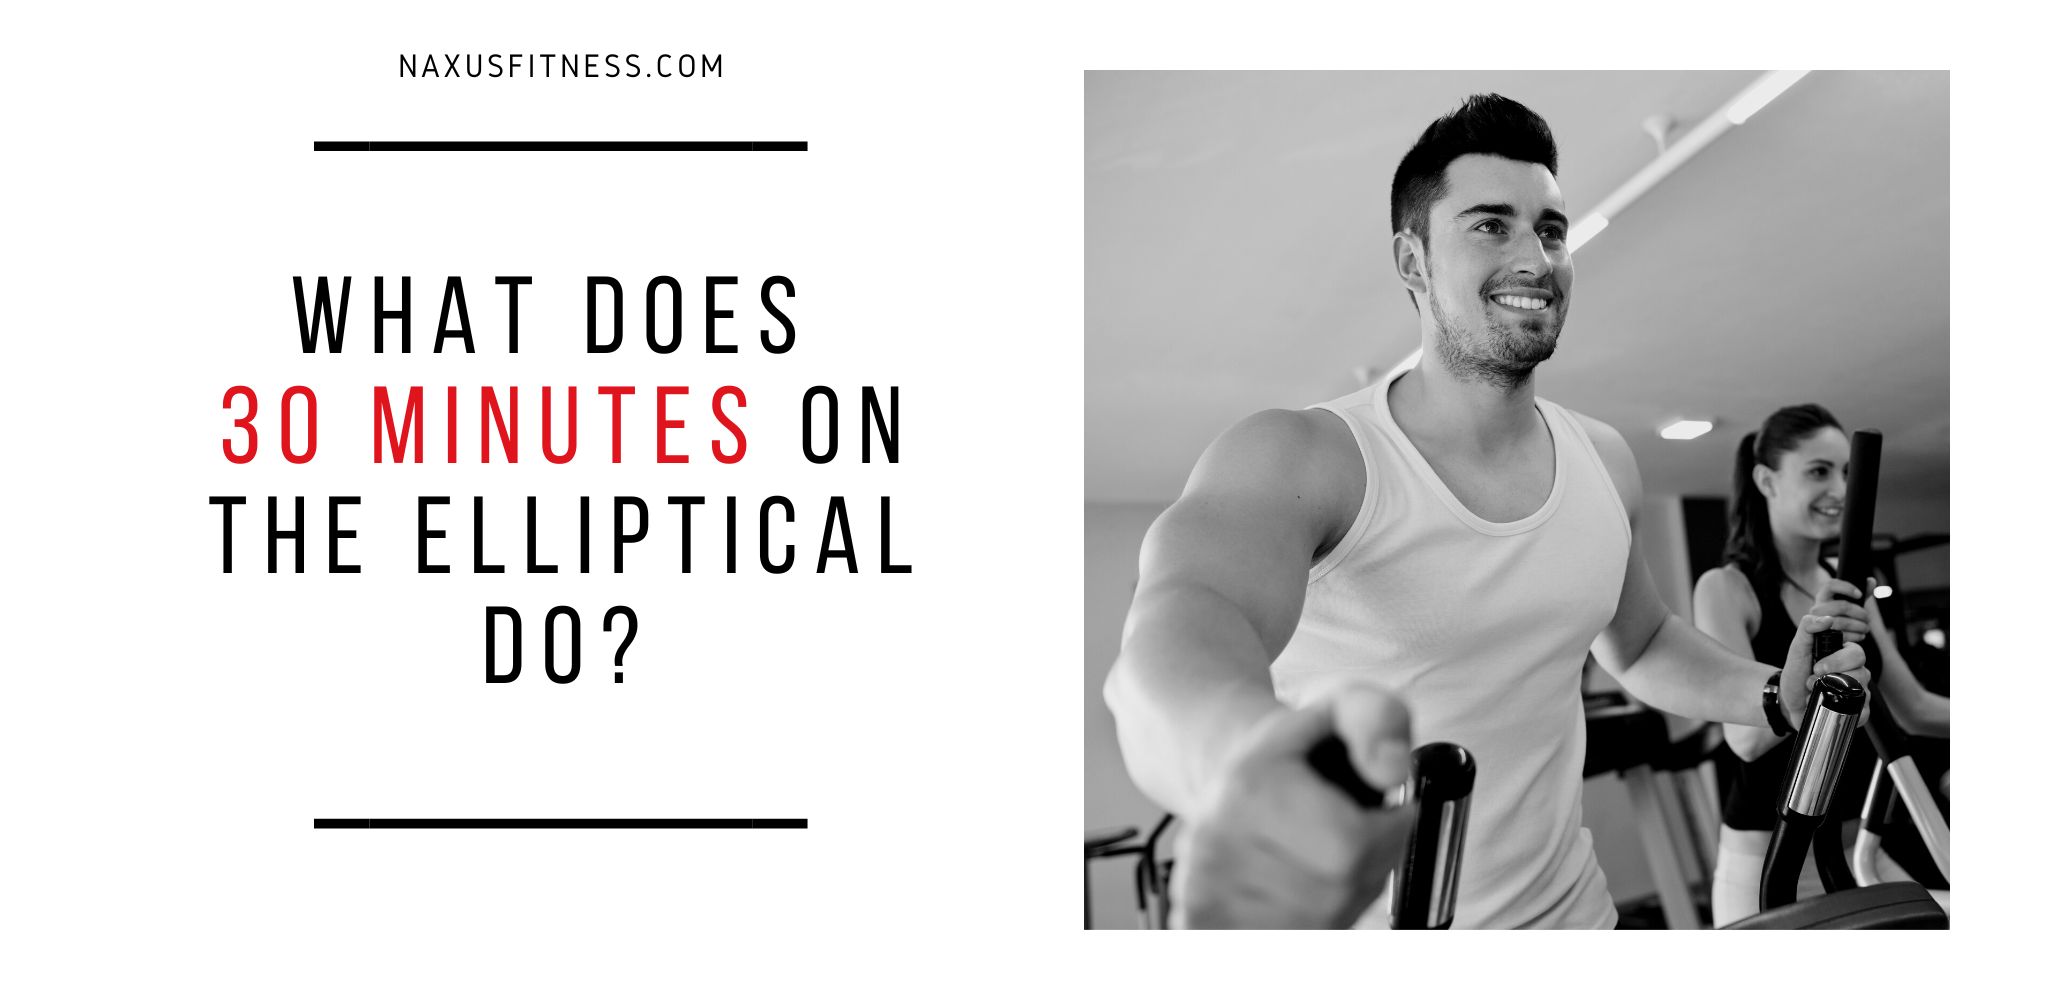 What does 30 minutes on the elliptical do?